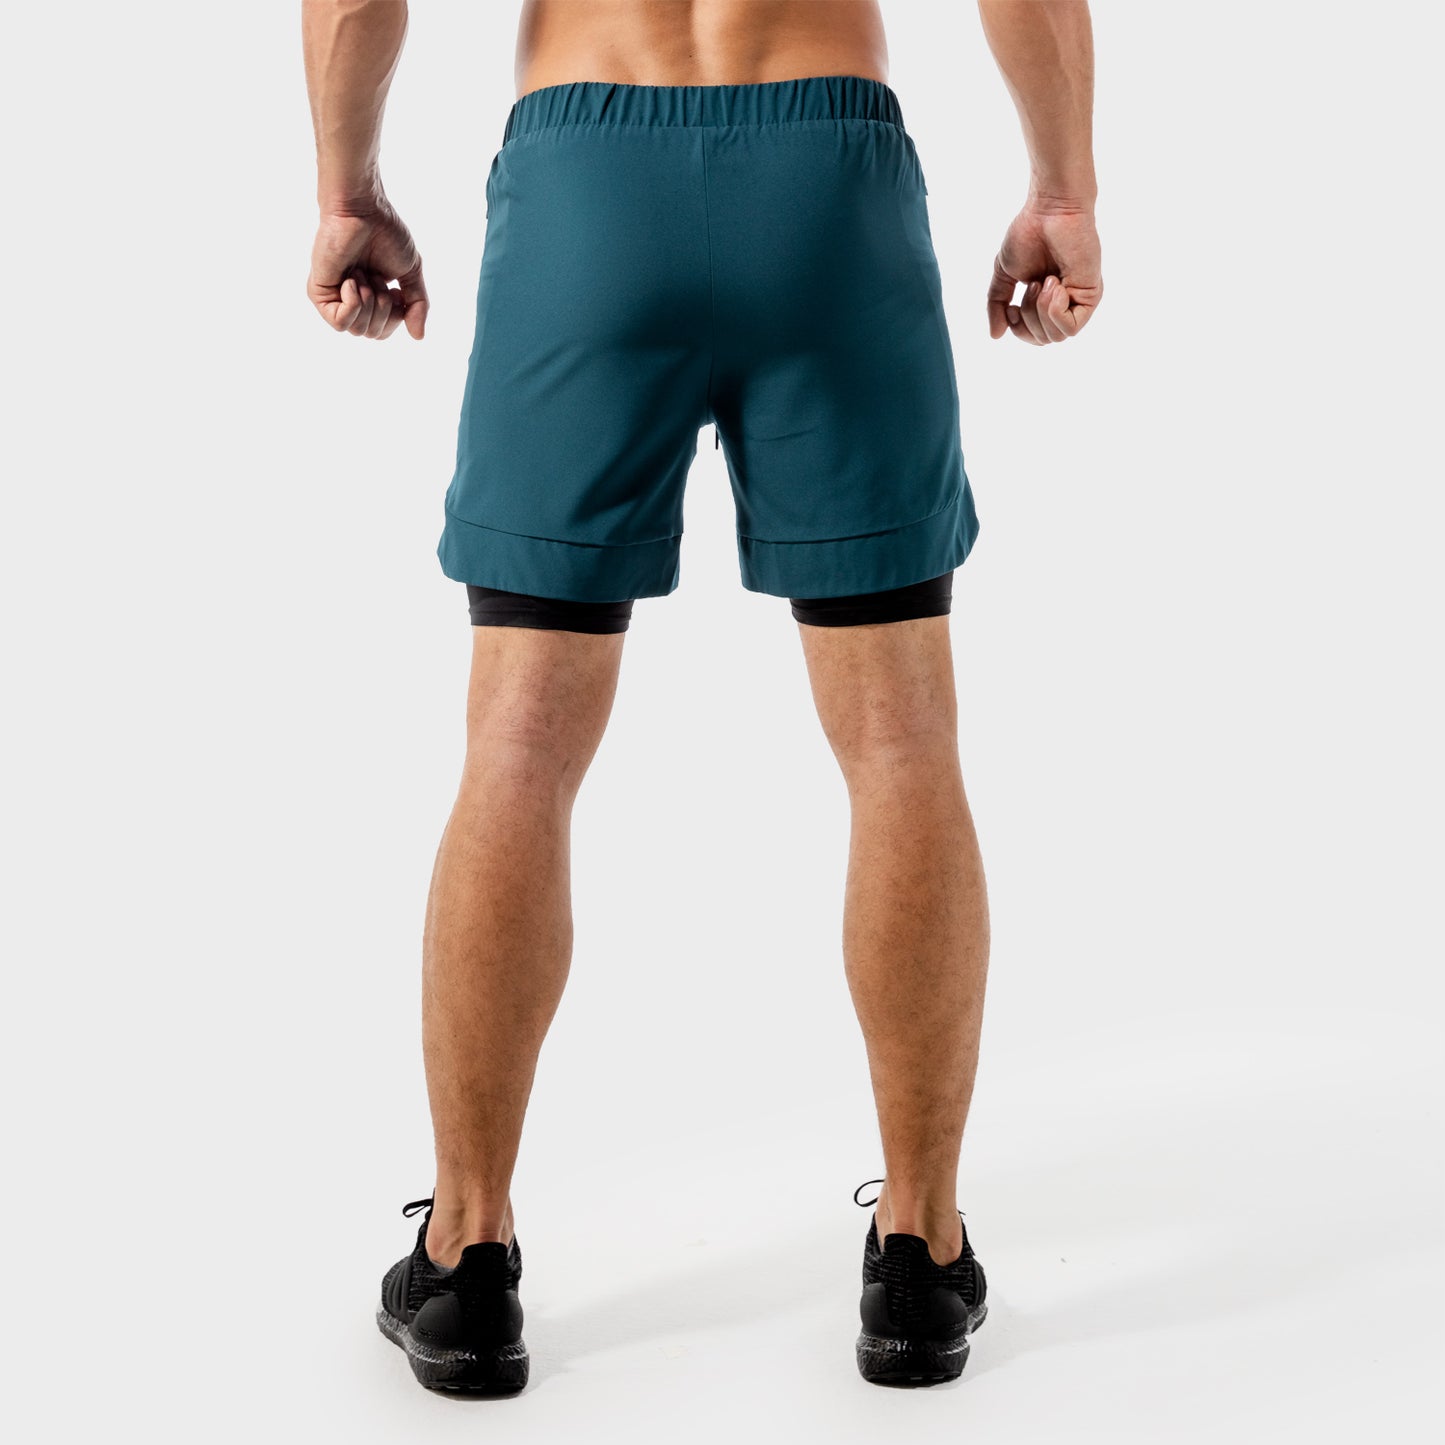 squatwolf-workout-short-for-men-limitless-2-in-1-shorts-teal-gym-wear